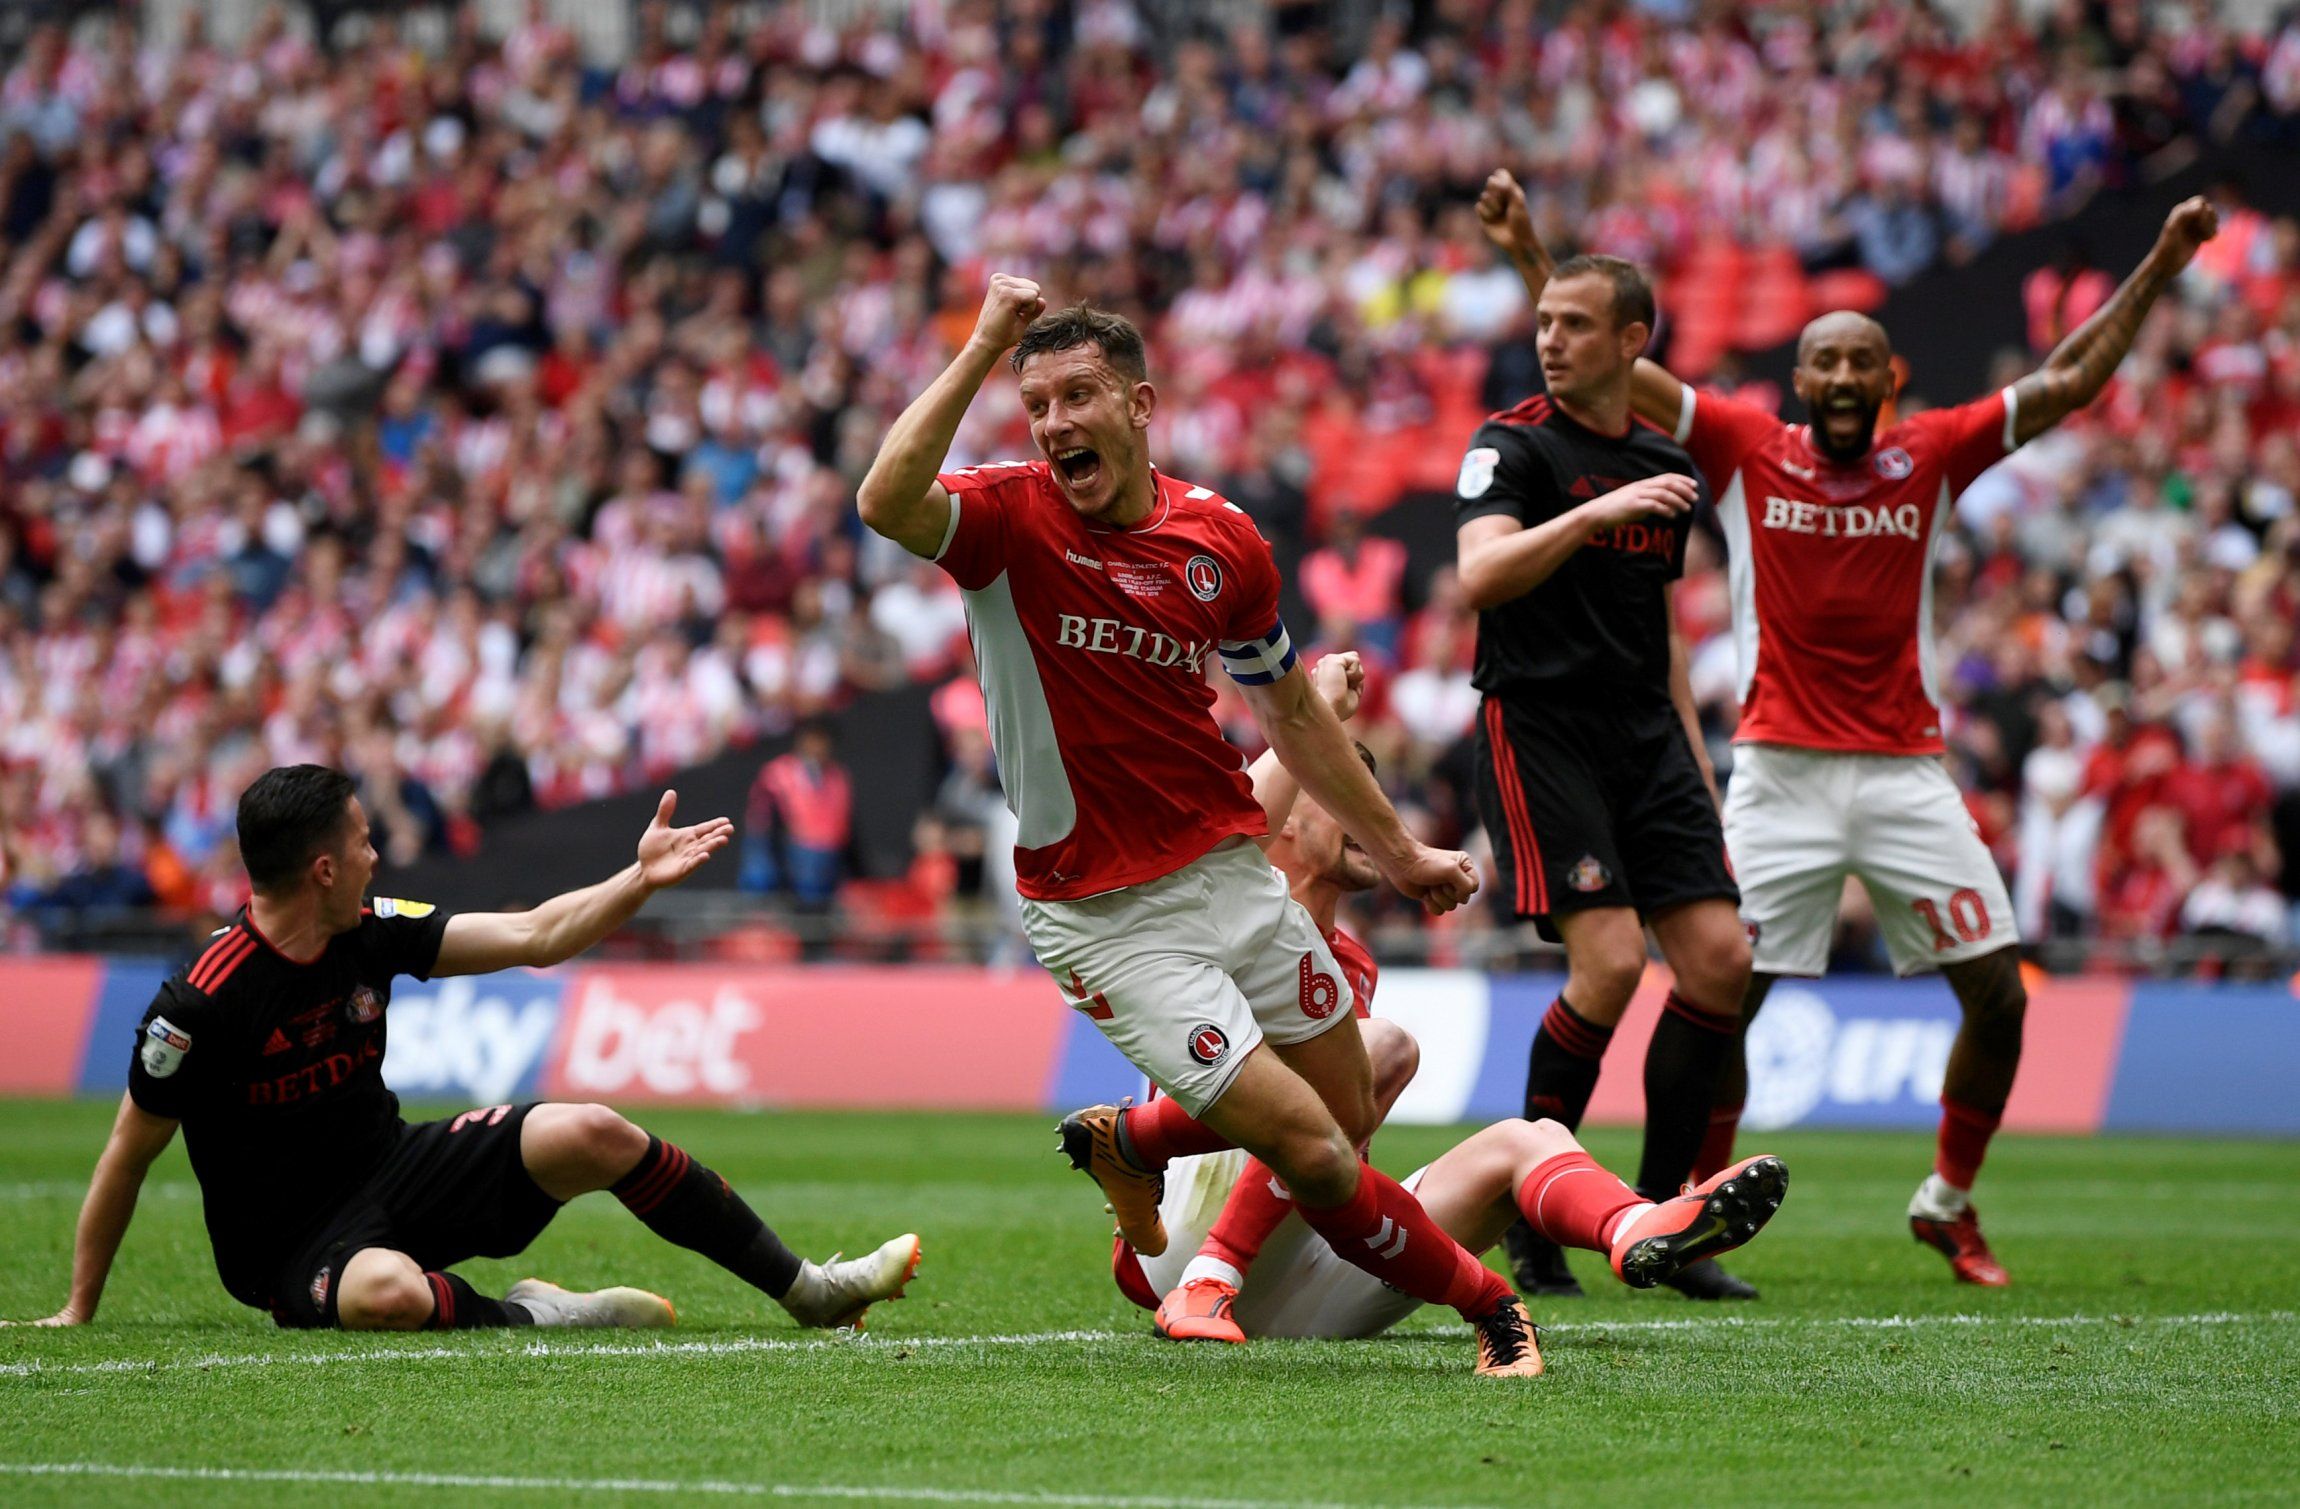 charlton athletic captain jason pearce wheels away in celebration as patrick bauer scores vs sunderland playoff final league one